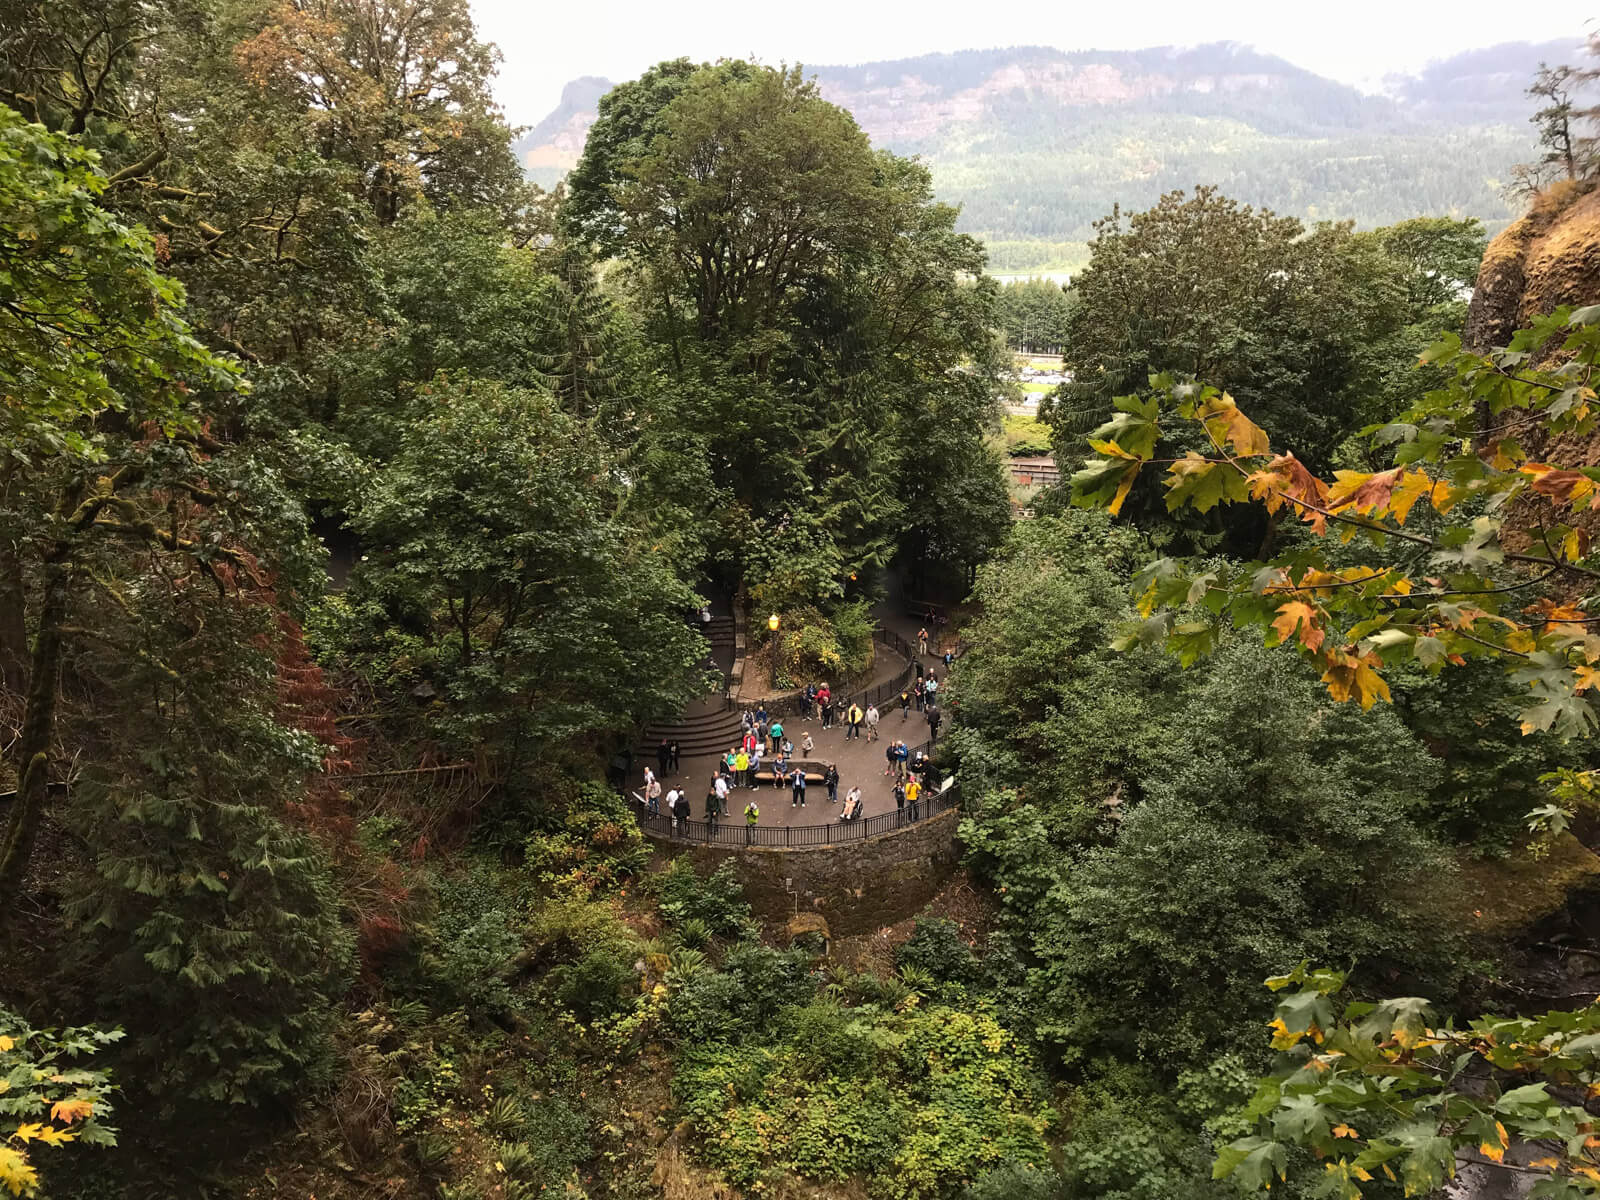 A large amount of trees, amongst which a round viewing platform with a railing can be seen a fair distance ahead and downwards. The viewing platform has many tourists on it